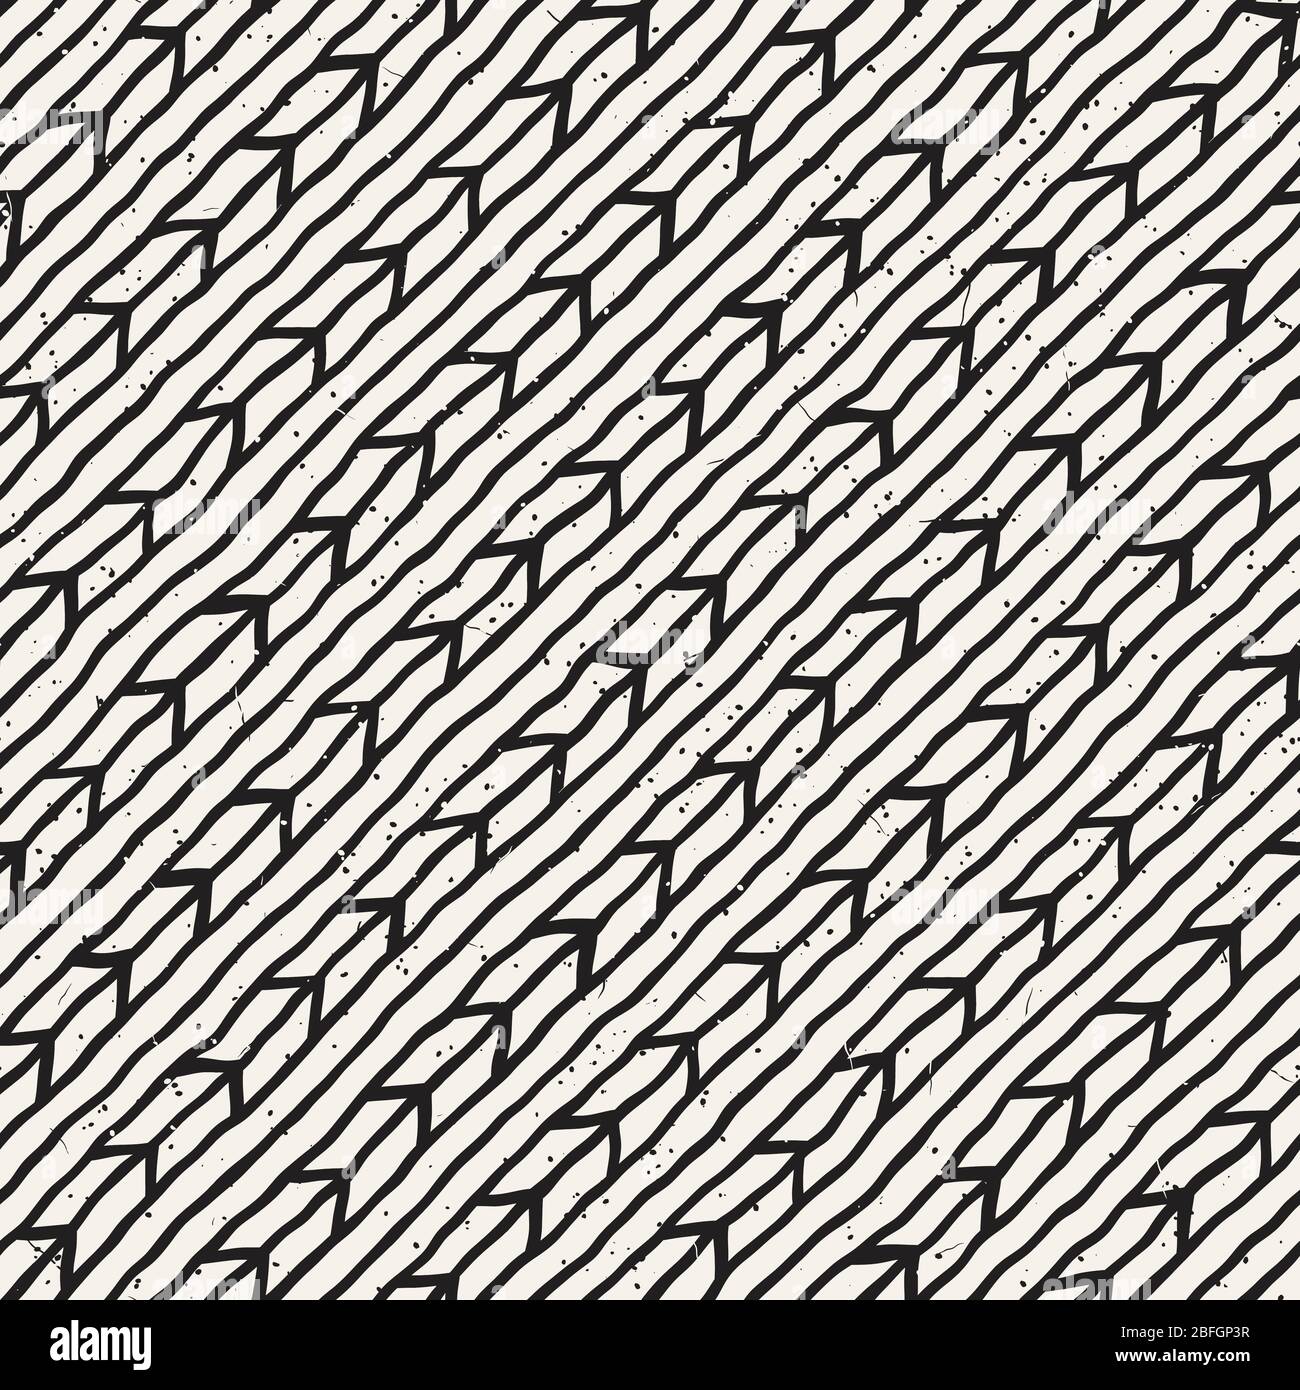 Simple ink geometric pattern. Monochrome black and white strokes background. Hand drawn ink texture for your design. Stock Vector